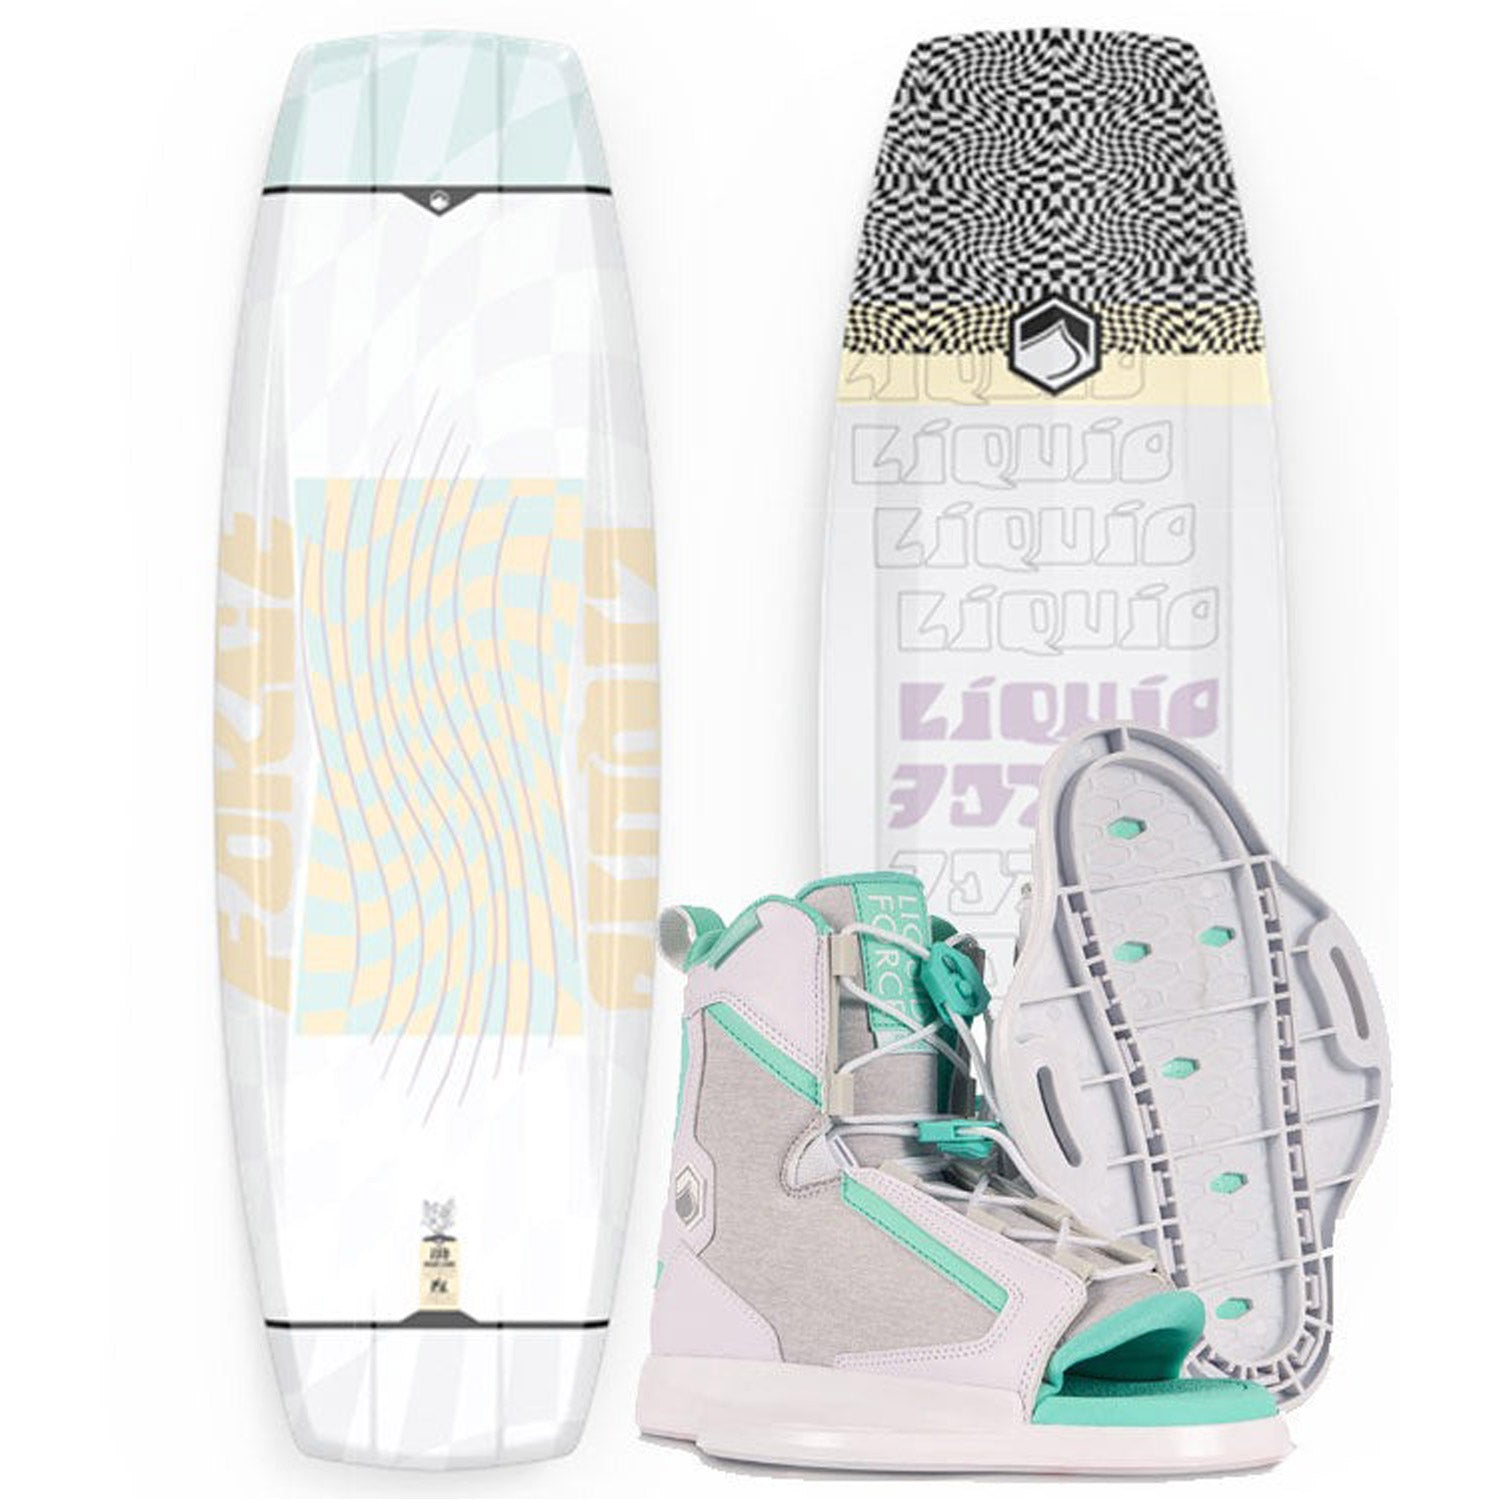 M.E. Wakeboard w/ Plush Boot Package